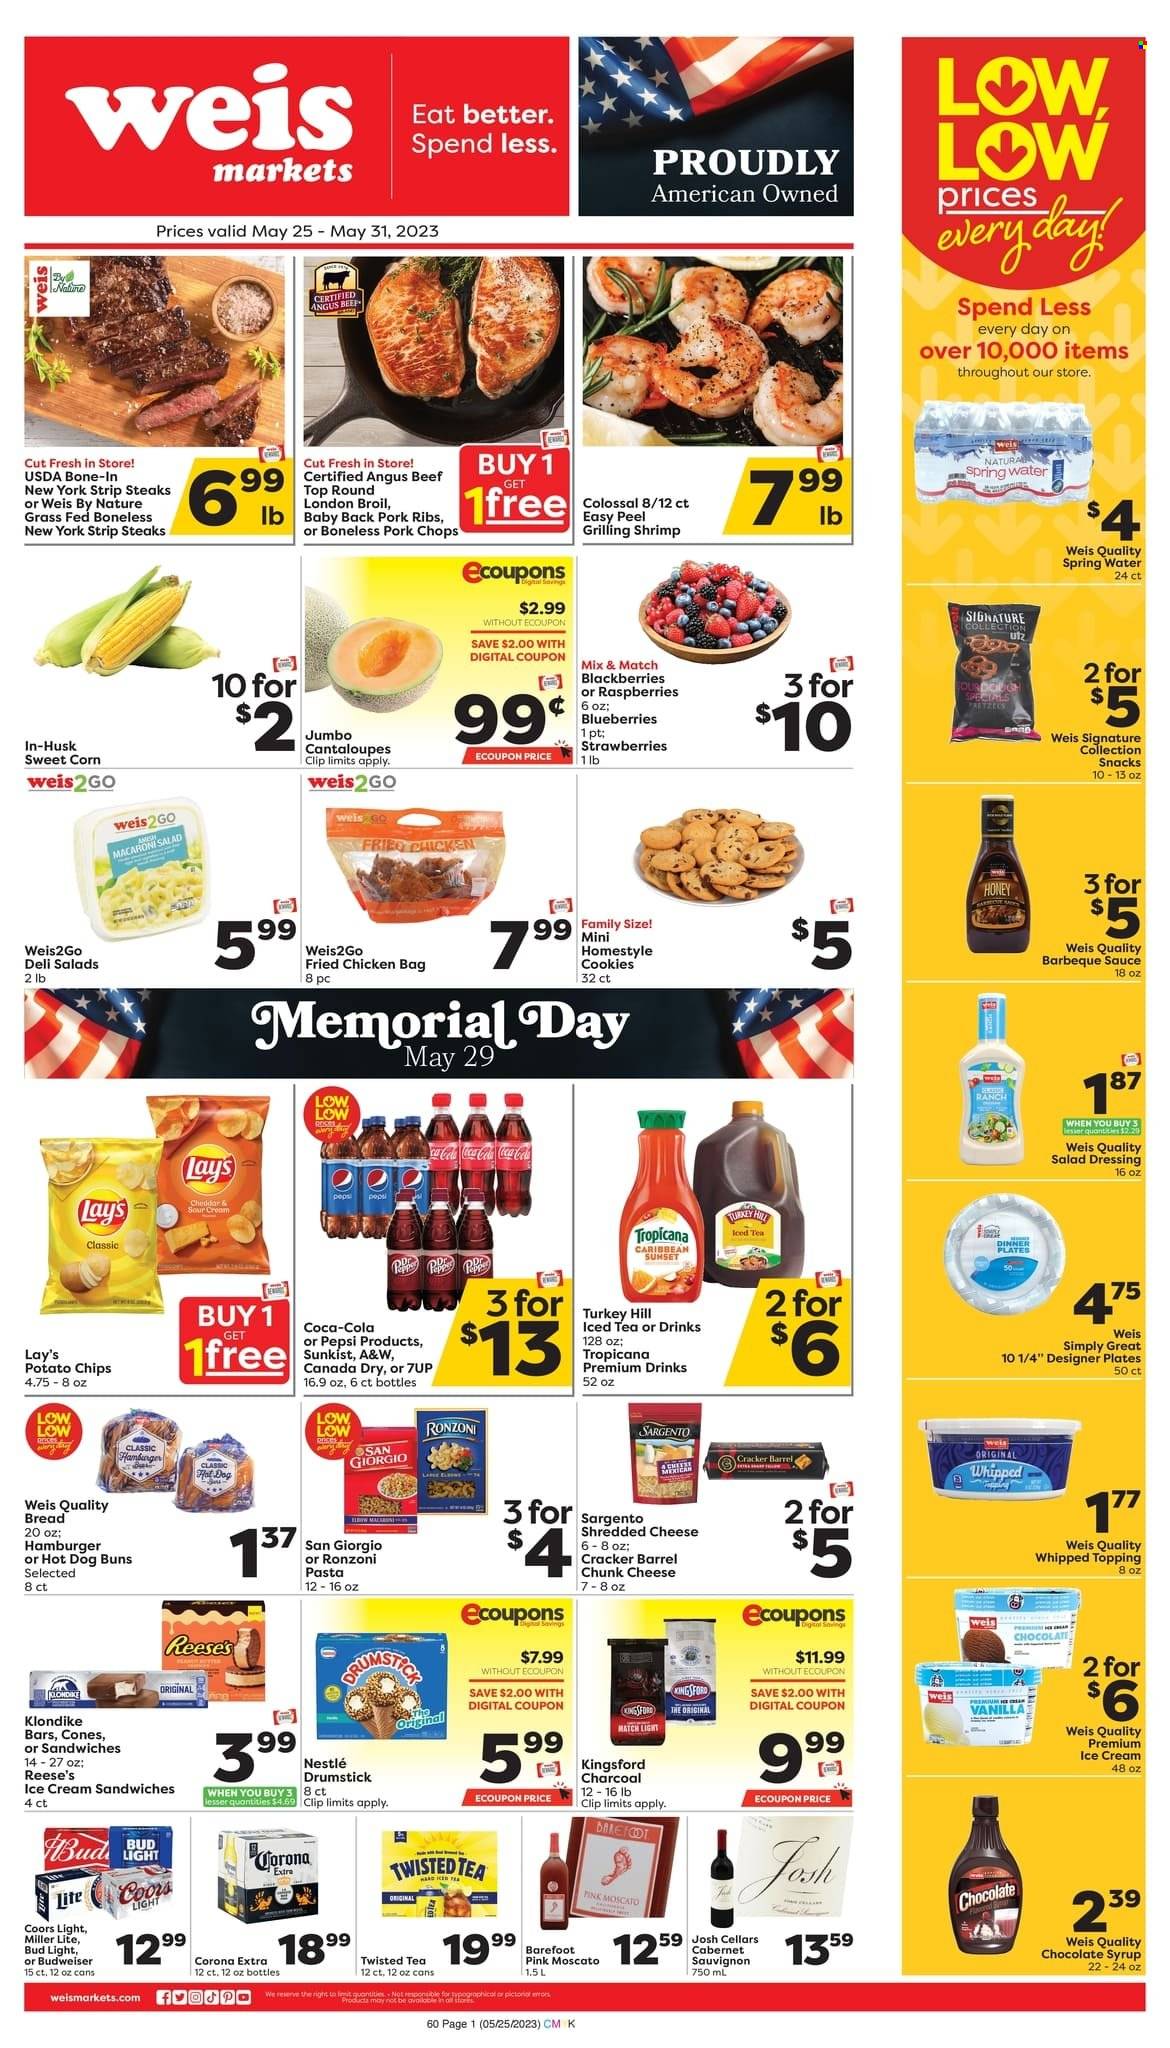 thumbnail - Weis Flyer - 05/25/2023 - 05/31/2023 - Sales products - bread, buns, cantaloupe, corn, sweet corn, blackberries, blueberries, raspberries, strawberries, turkey, beef meat, steak, striploin steak, ribs, pork chops, pork meat, pork ribs, pork back ribs, shrimps, pasta, sauce, fried chicken, Kingsford, snack, macaroni salad, shredded cheese, cheese, chunk cheese, Sargento, ice cream, ice cream sandwich, Reese's, ice cones, cookies, Nestlé, crackers, potato chips, chips, Lay’s, topping, BBQ sauce, salad dressing, dressing, honey, chocolate syrup, syrup, Canada Dry, Coca-Cola, Pepsi, ice tea, soft drink, 7UP, A&W, spring water, water, Cabernet Sauvignon, red wine, wine, Moscato, rosé wine, beer, Bud Light, Corona Extra, plate, dinner plate, Budweiser, Miller Lite, Coors, Twisted Tea. Page 1.